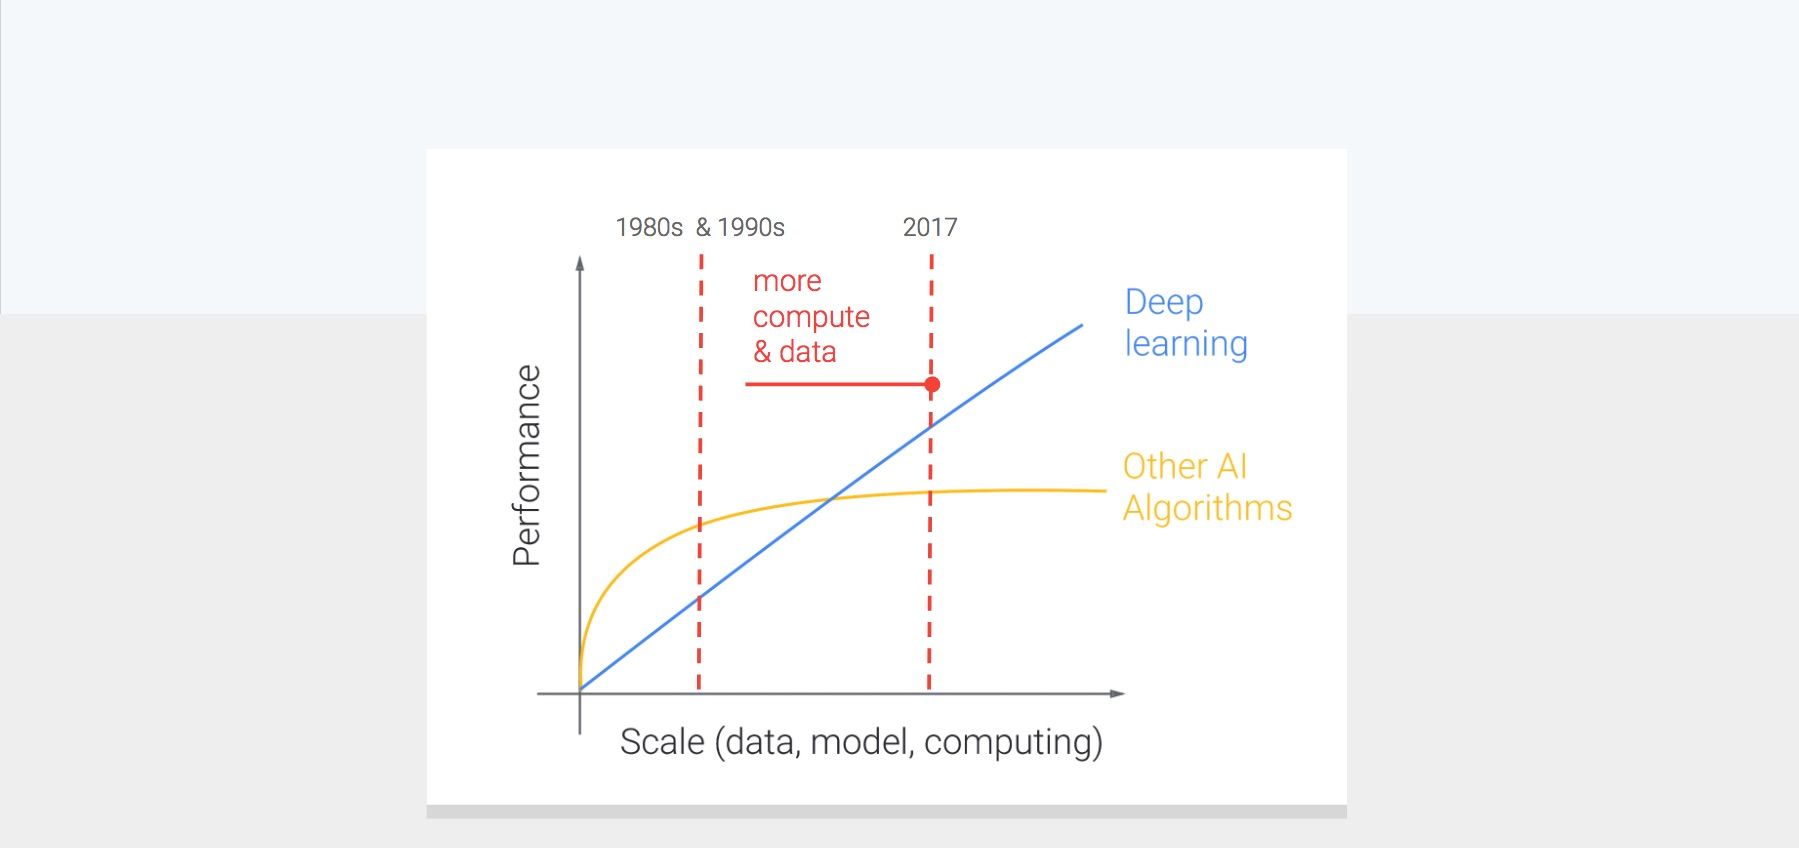 Deep learning scales with data